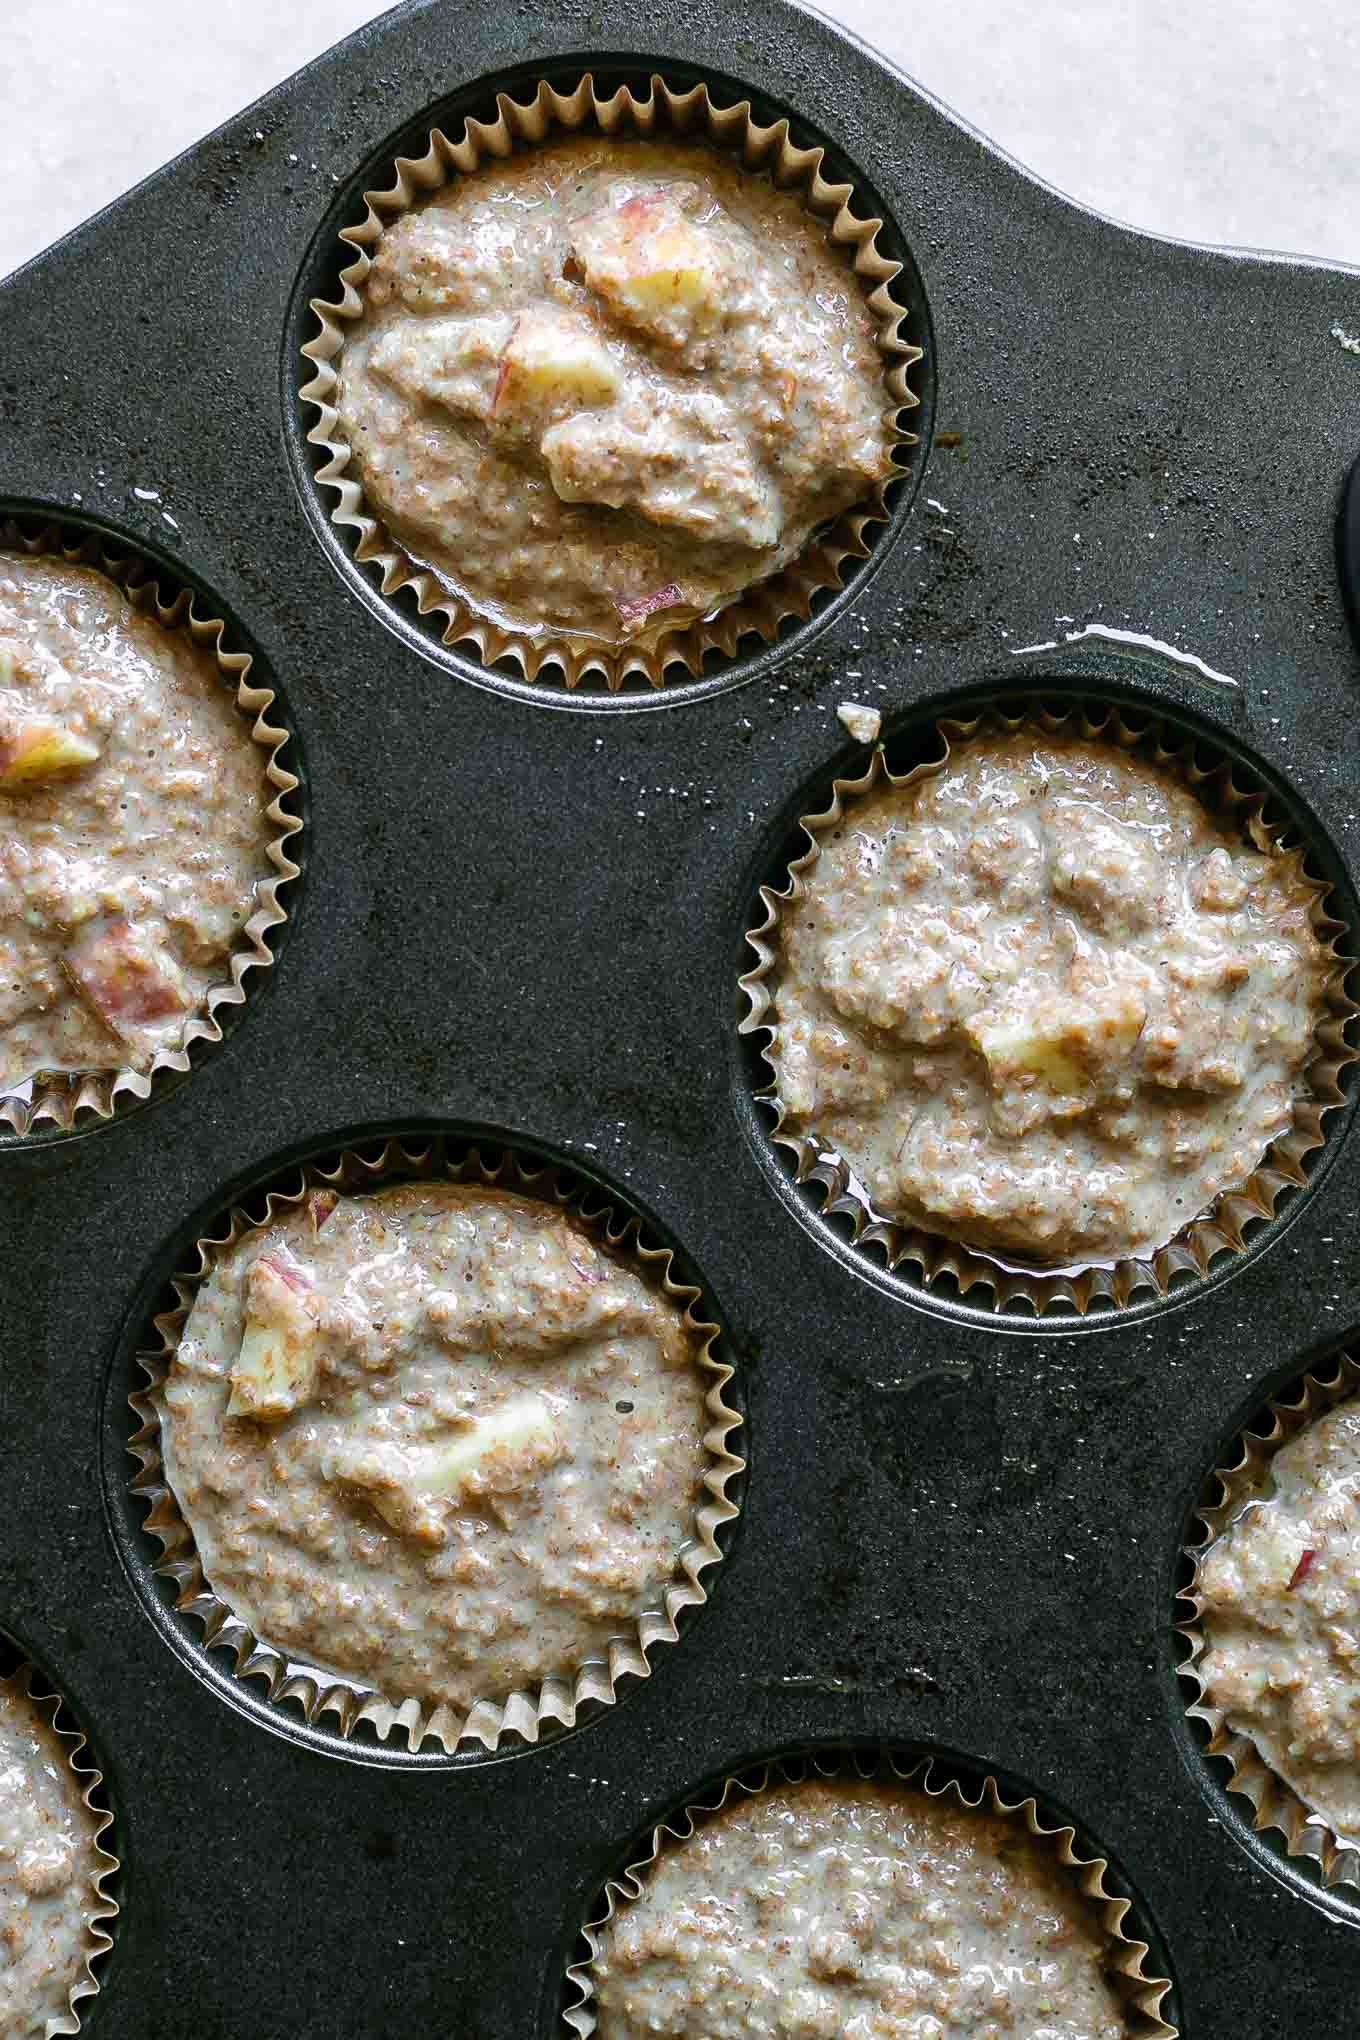 apple bran muffin batter in a muffin pan before baking